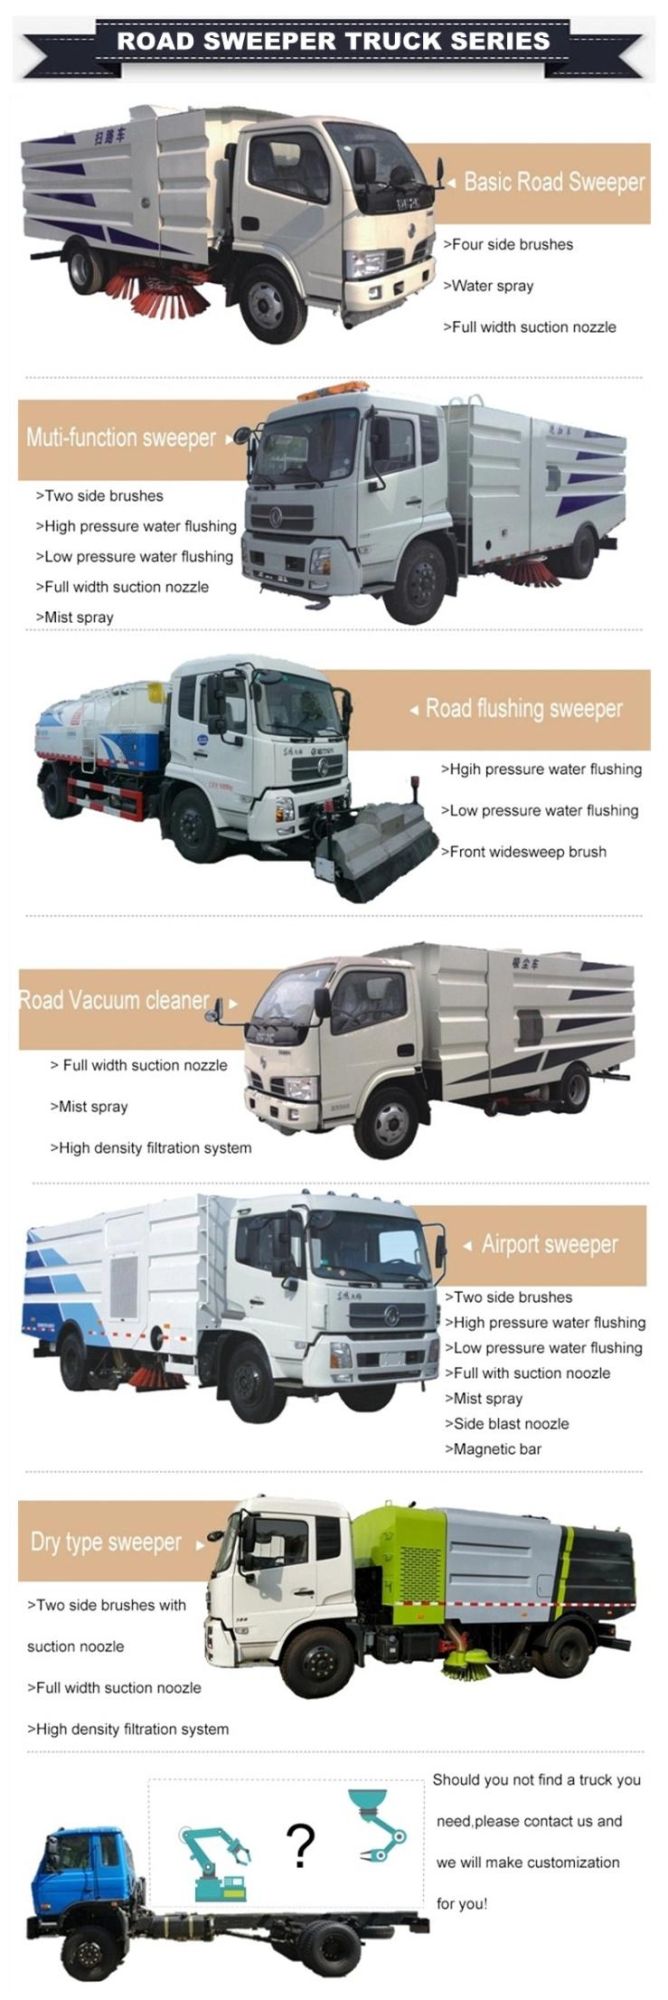 Factory Price Small Dongfeng 5cbm 5m3 Street Washing and Sweeping Truck